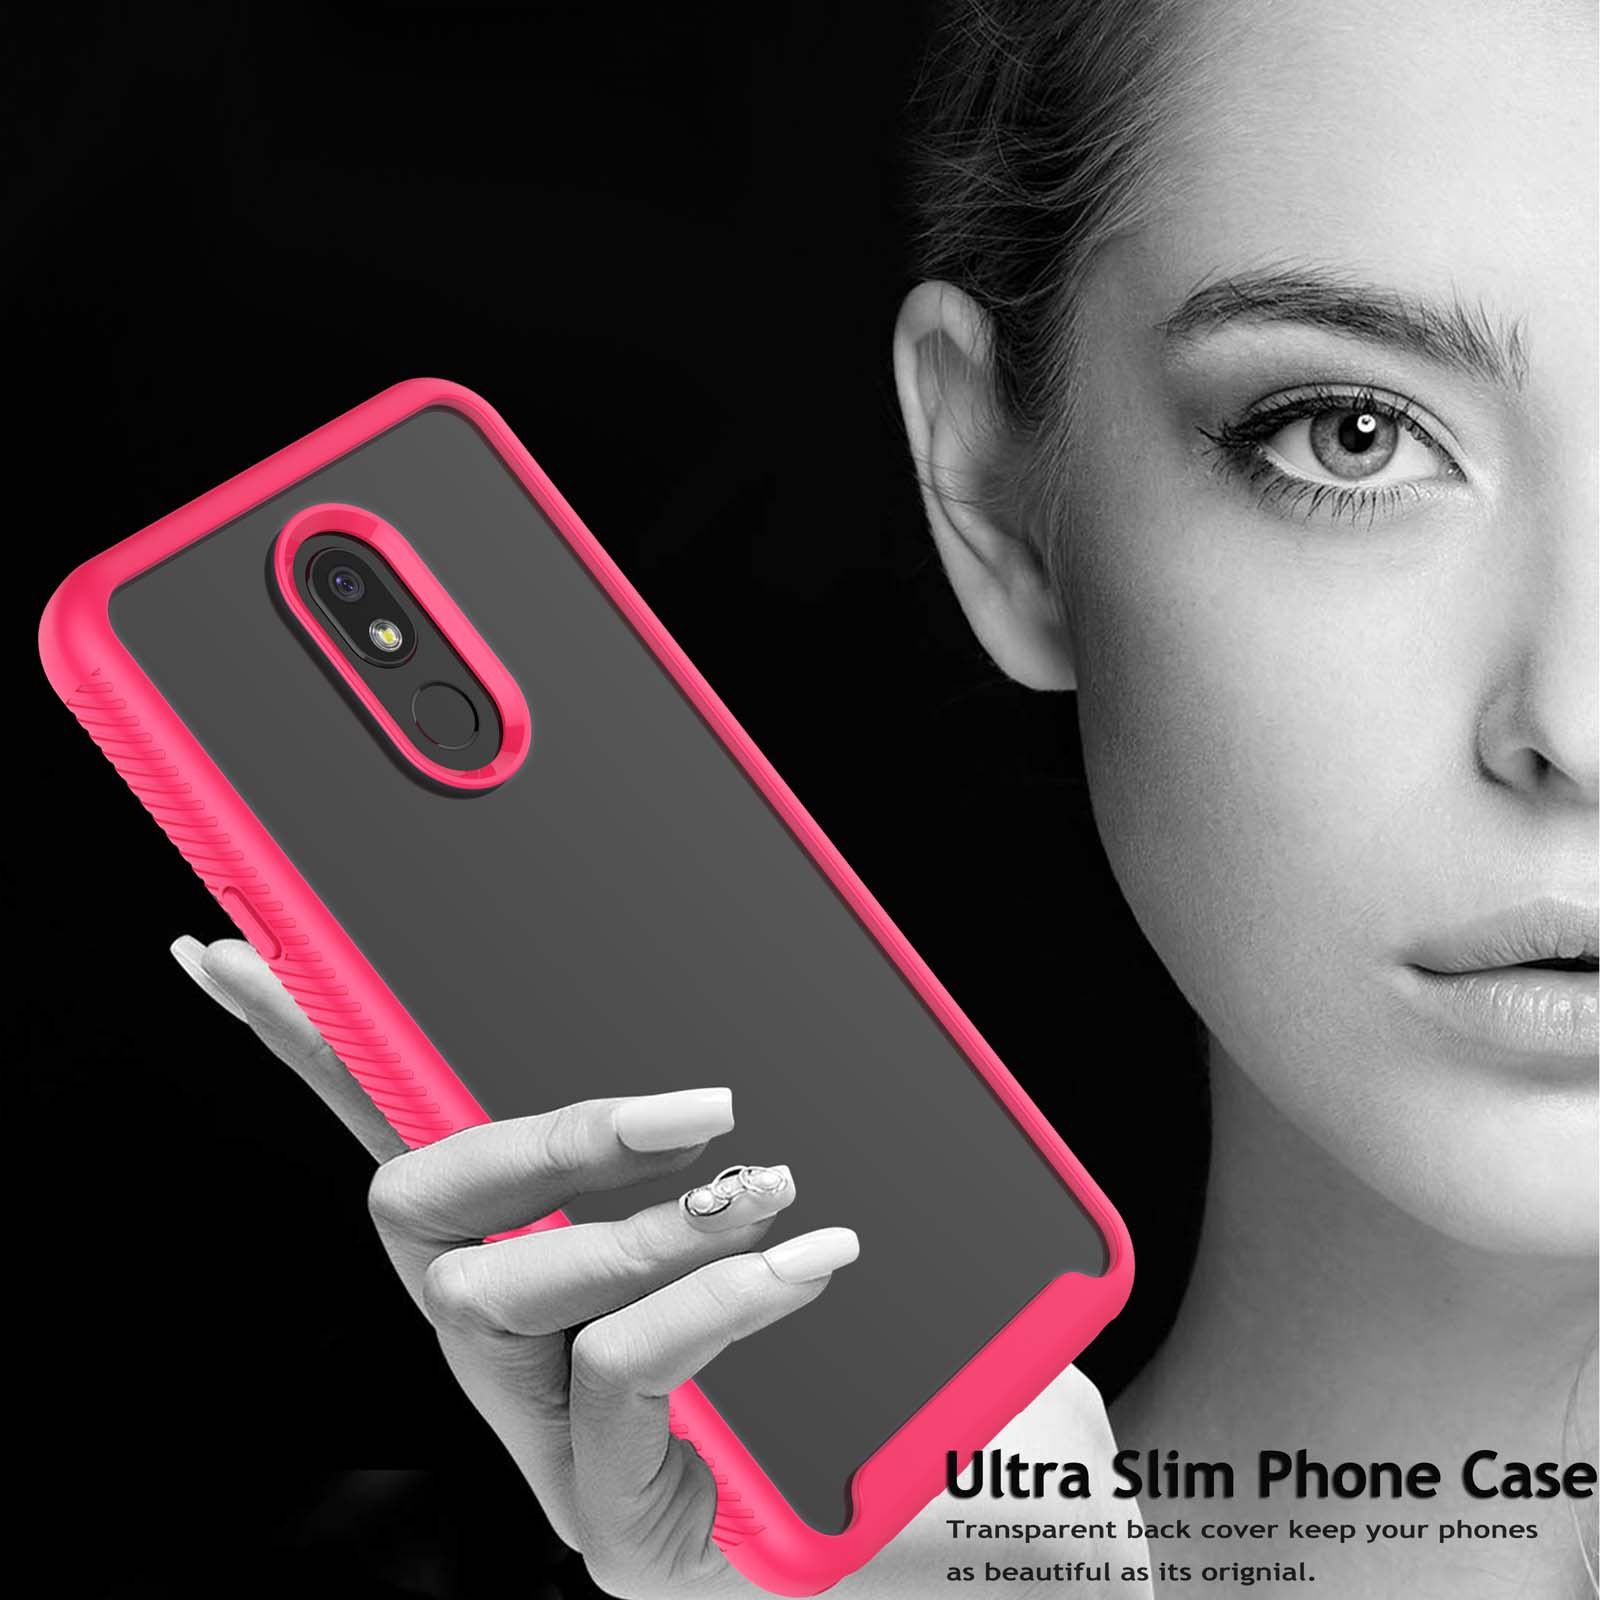 LG Stylo 6 Case, Sturdy Case for 2020 LG Stylo 6, Njjex Full-Body Rugged Transparent Clear Back Bumper Case Cover for LG Stylo 6 6.8" 2020 Not LG Stylo 5 6.2" -Hot Pink - image 5 of 10